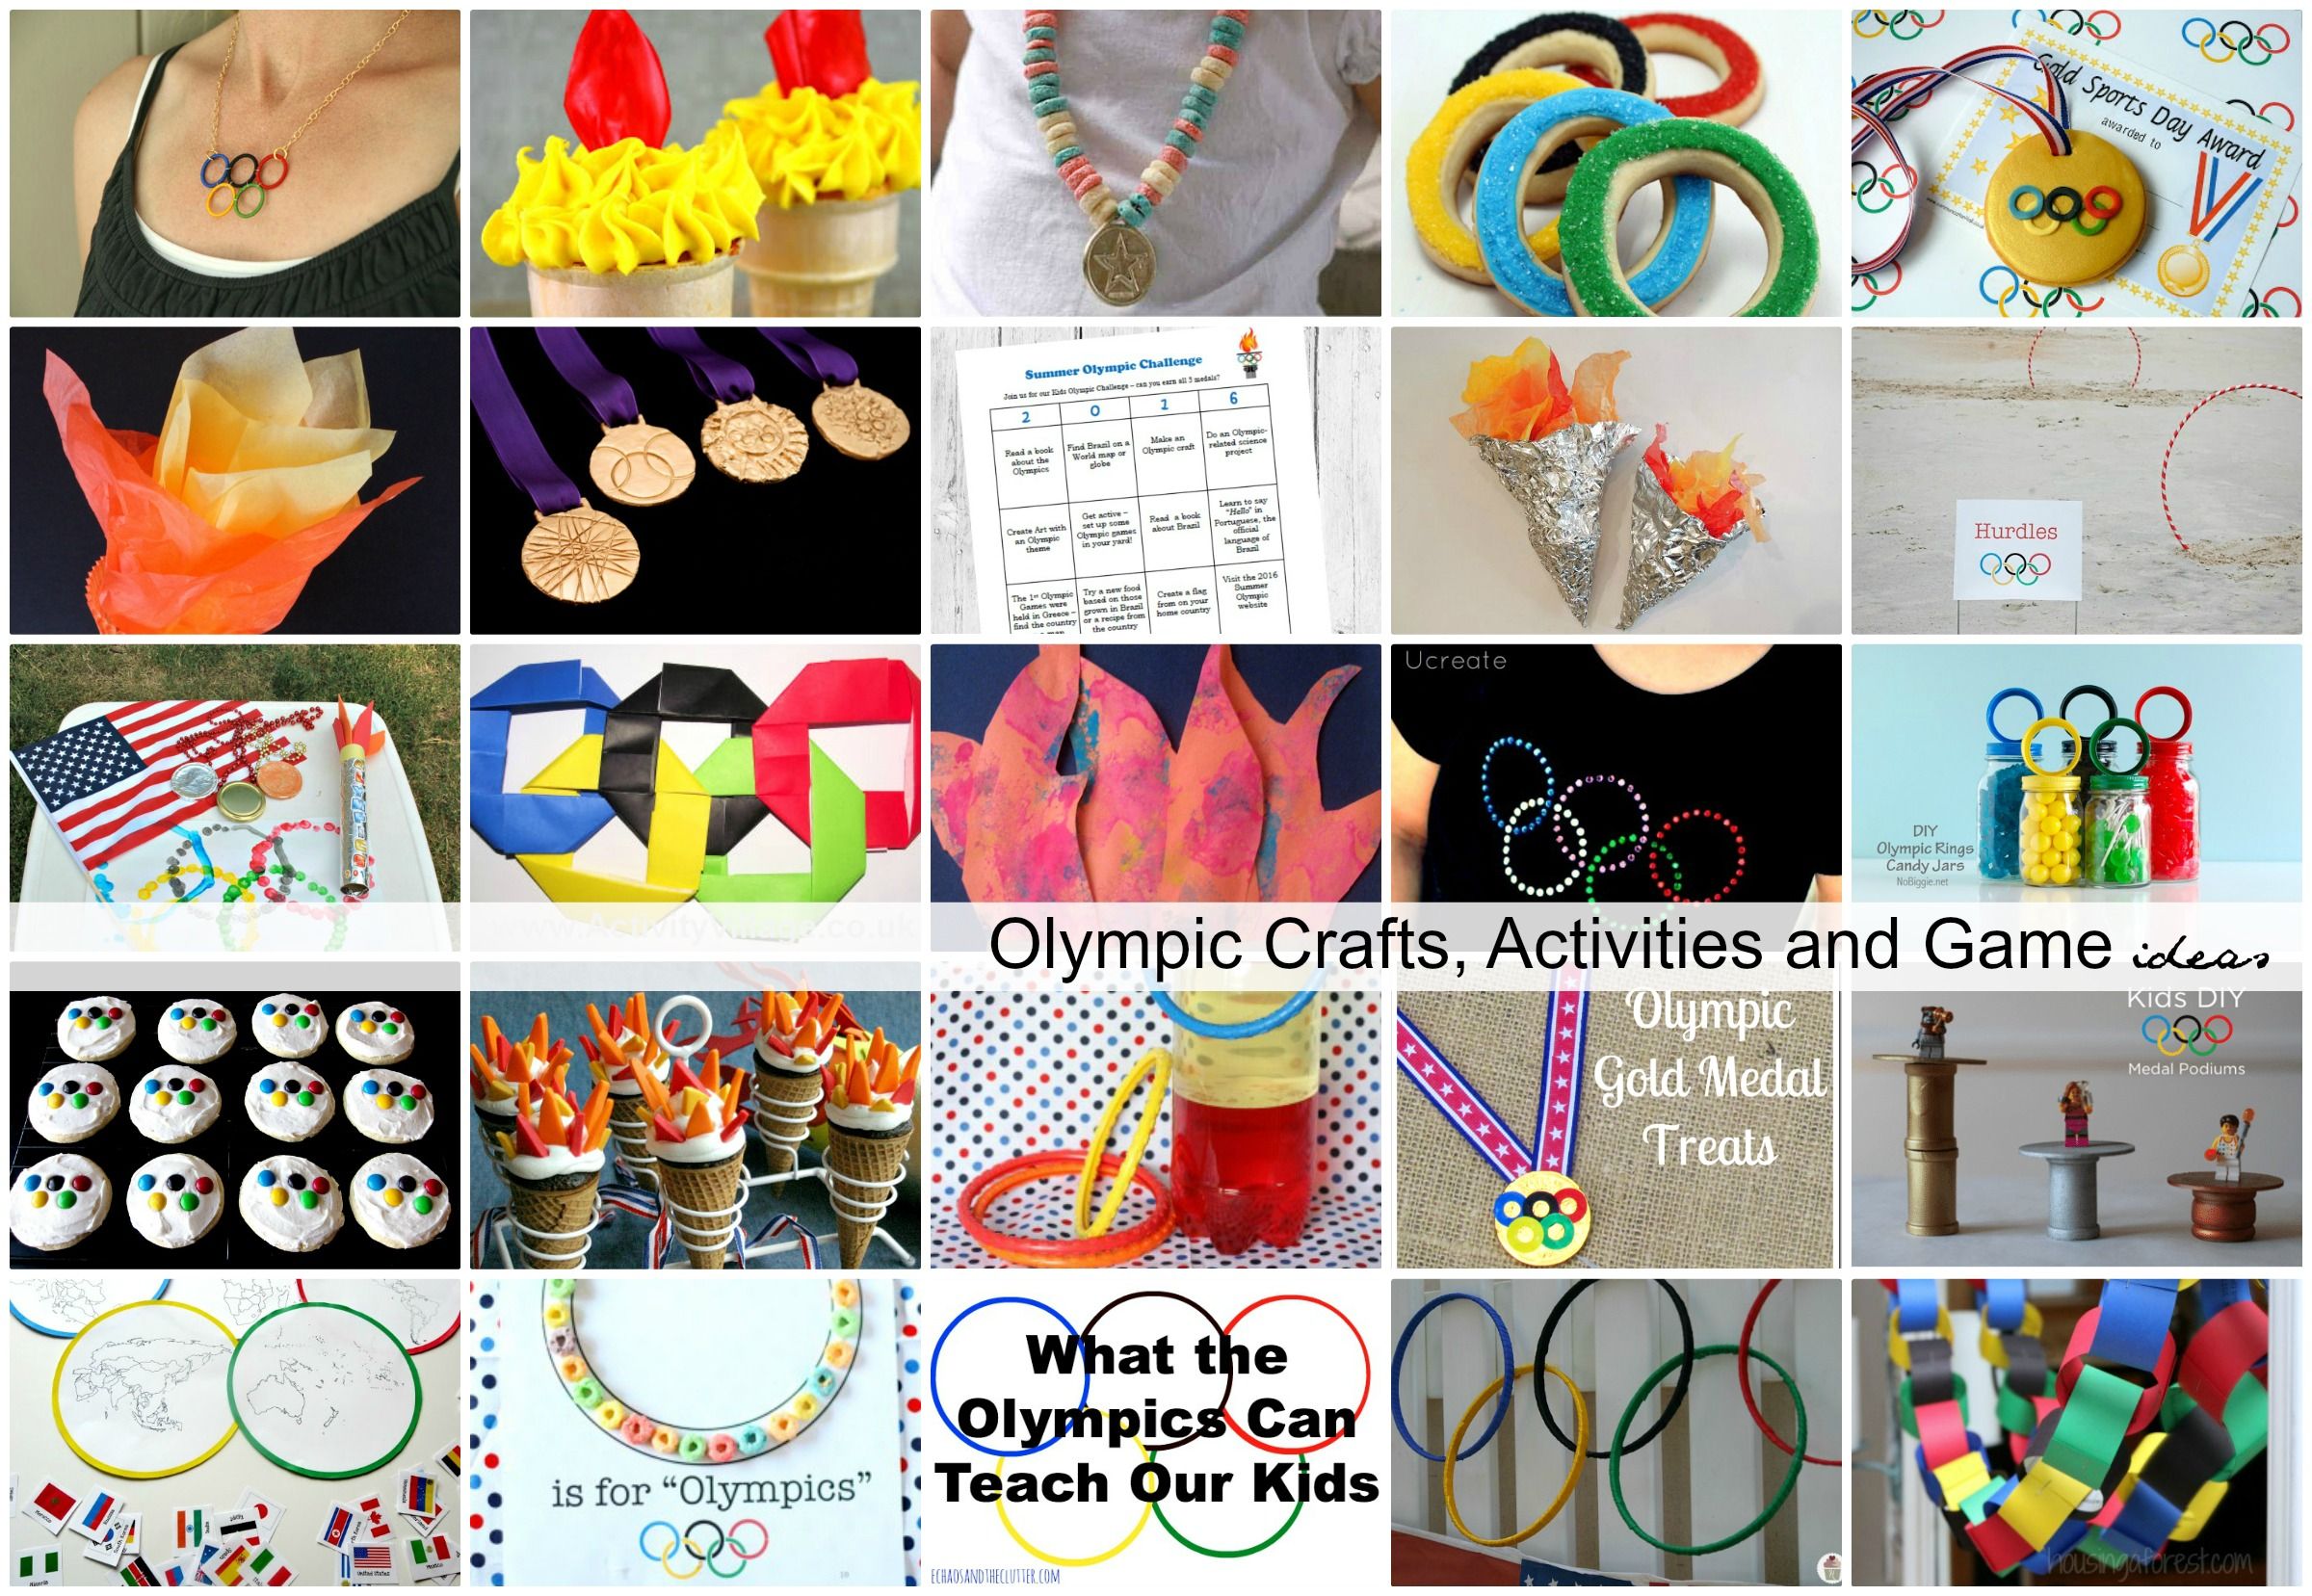 Olympic Crafts, Activities and Game Ideas -   Kids Activities Ideas